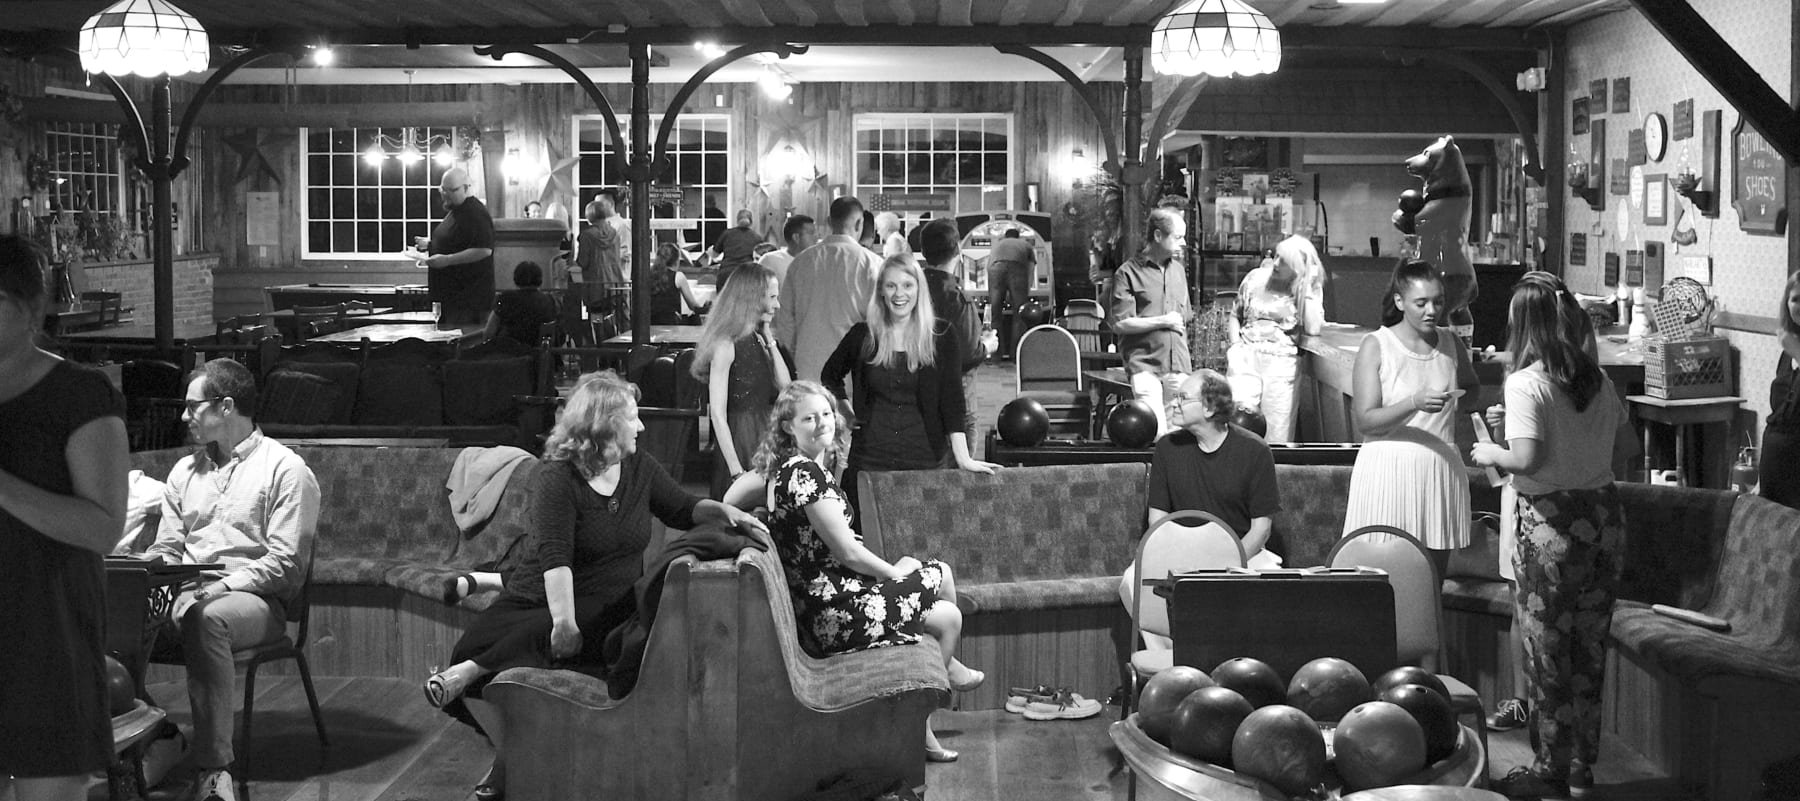 Black & White photo of people at the bar and lounge area.